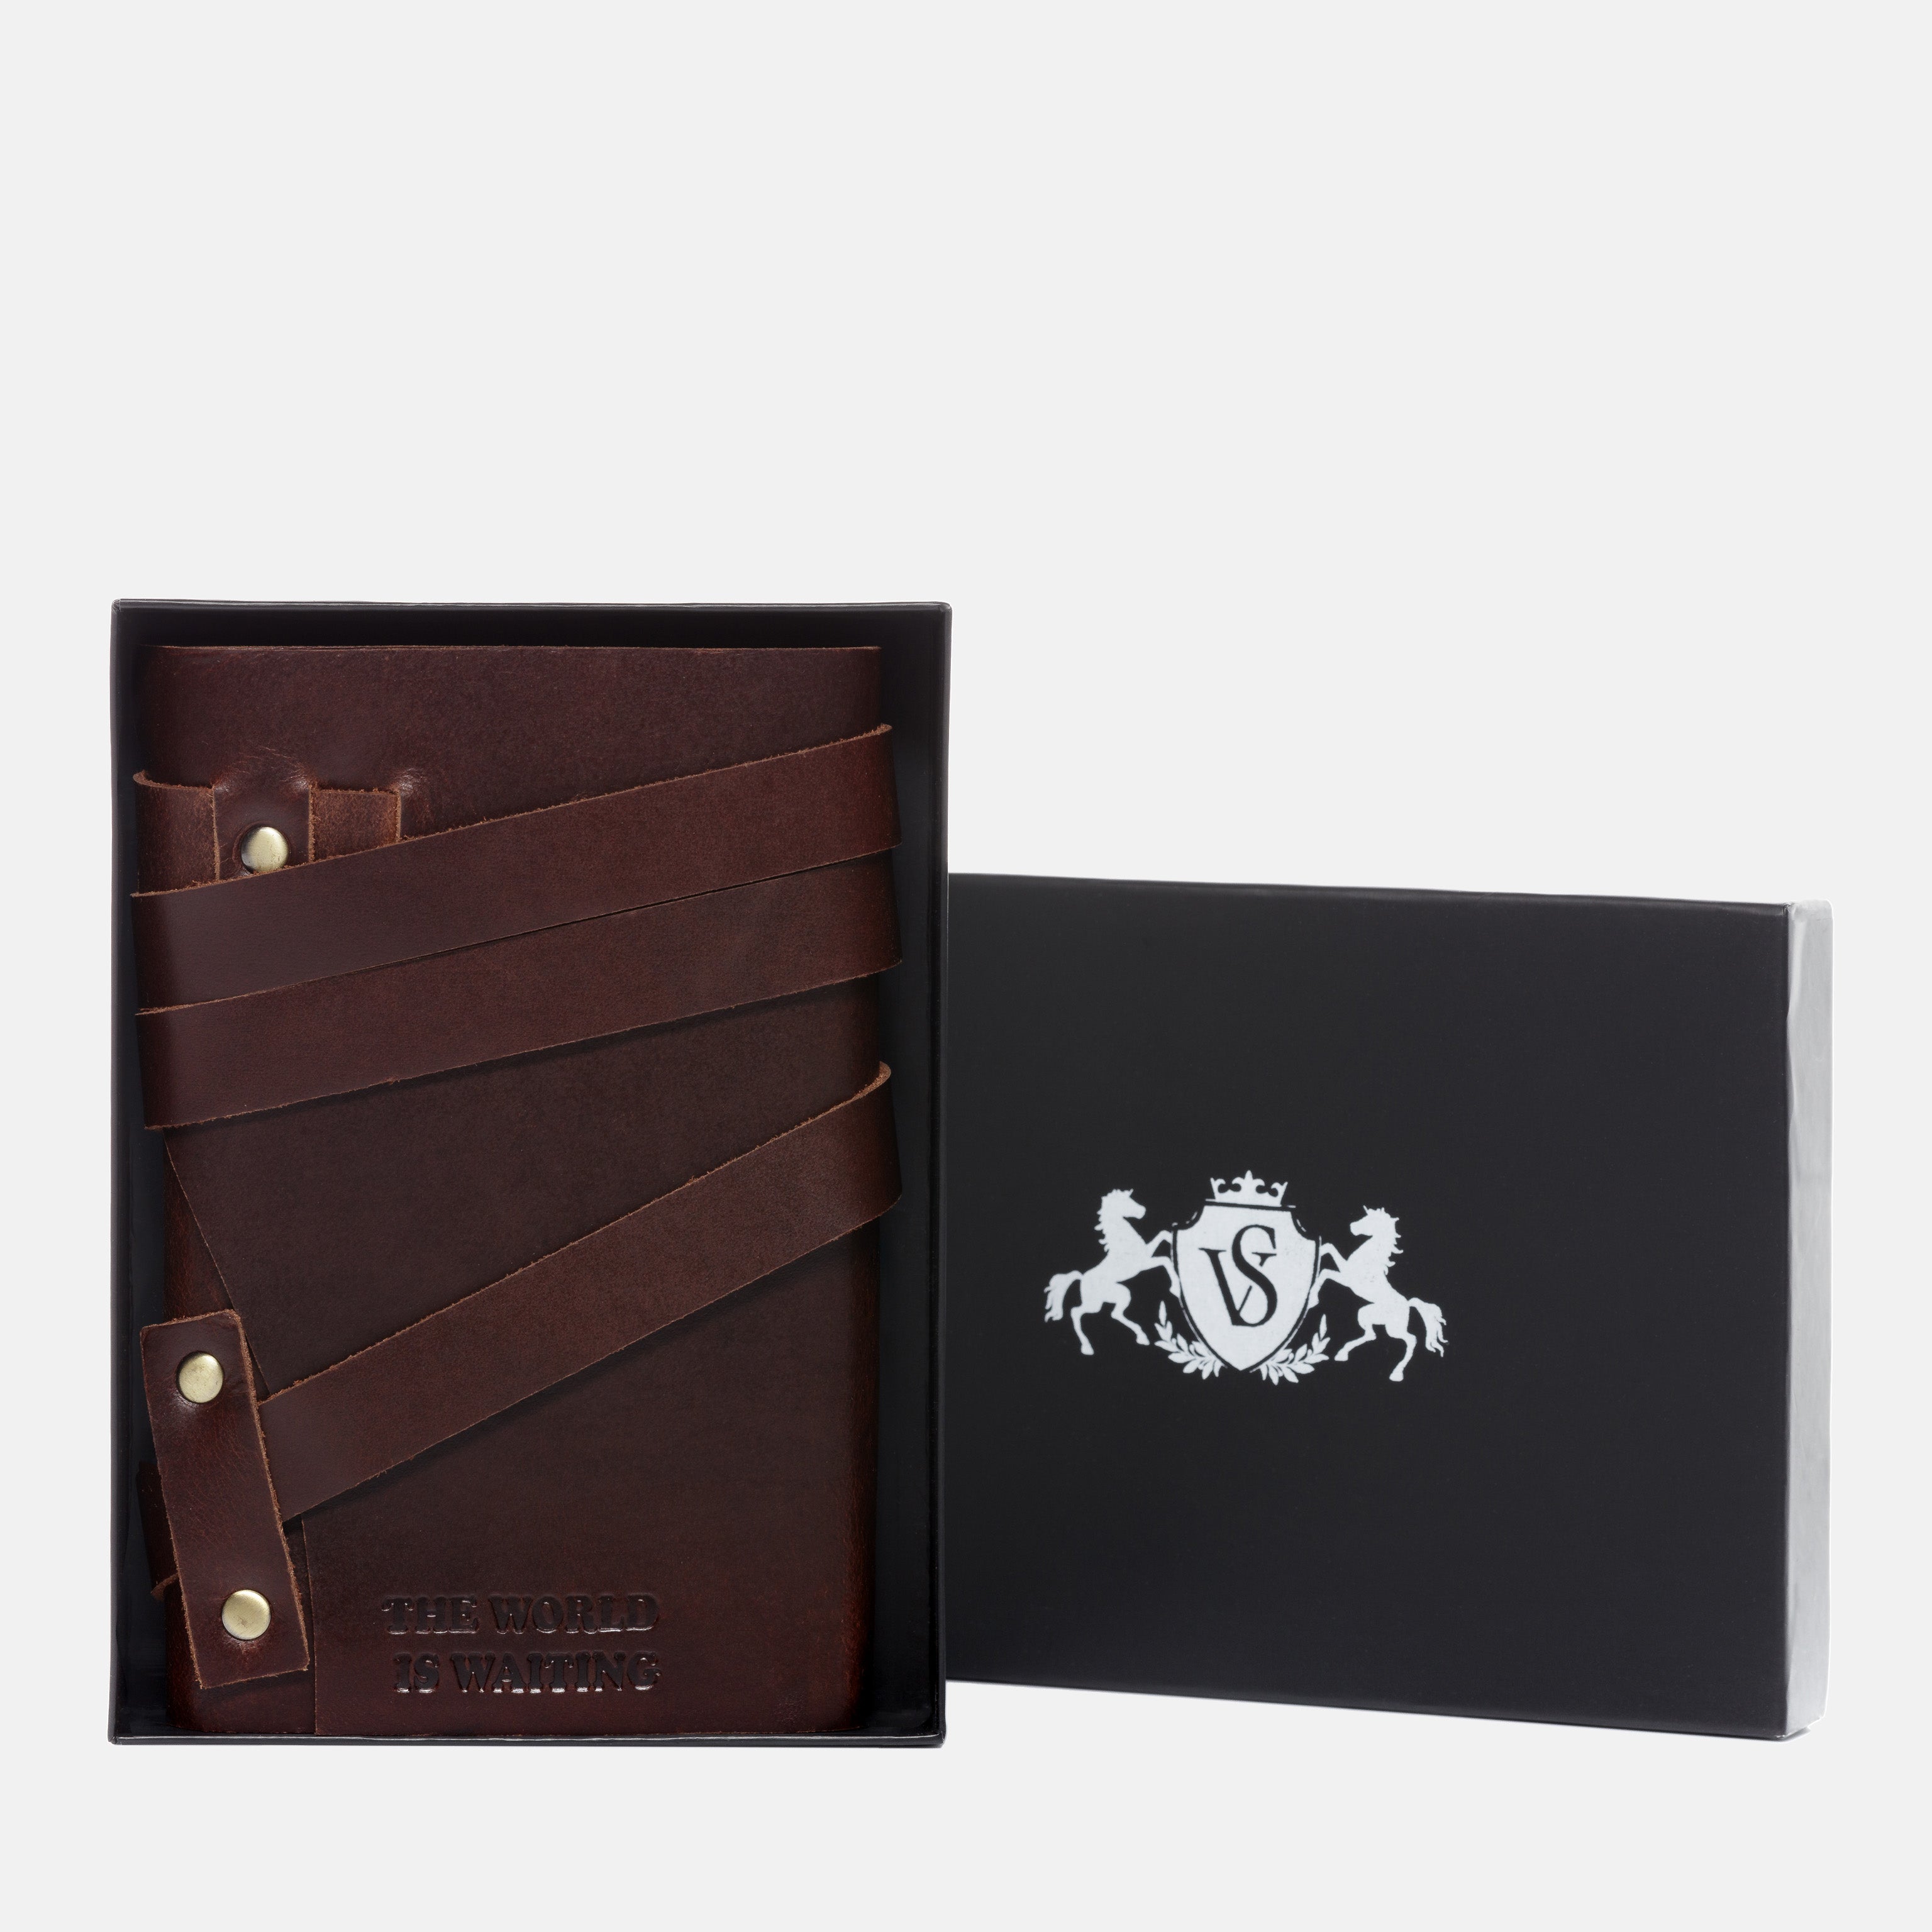 Notebook WORLD IS WAITING natural leather brown-cognac